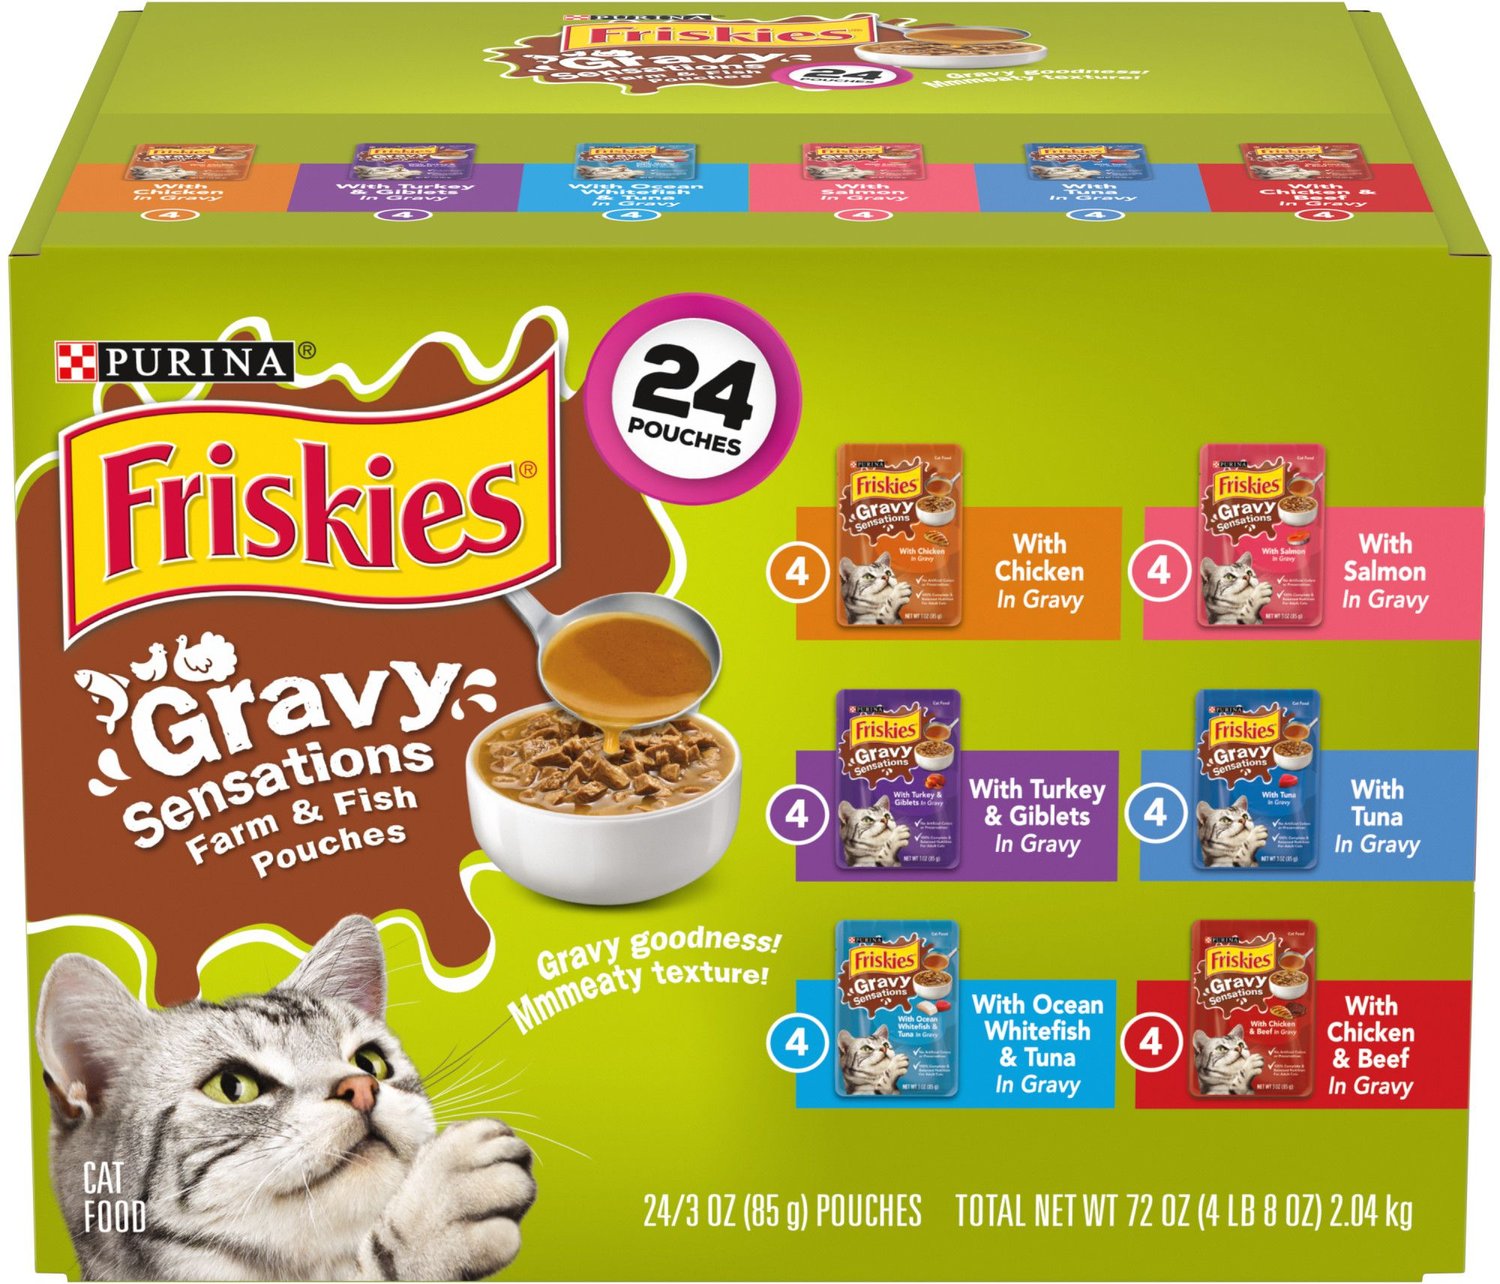 Is There A Shortage Of Friskies Canned Cat Food